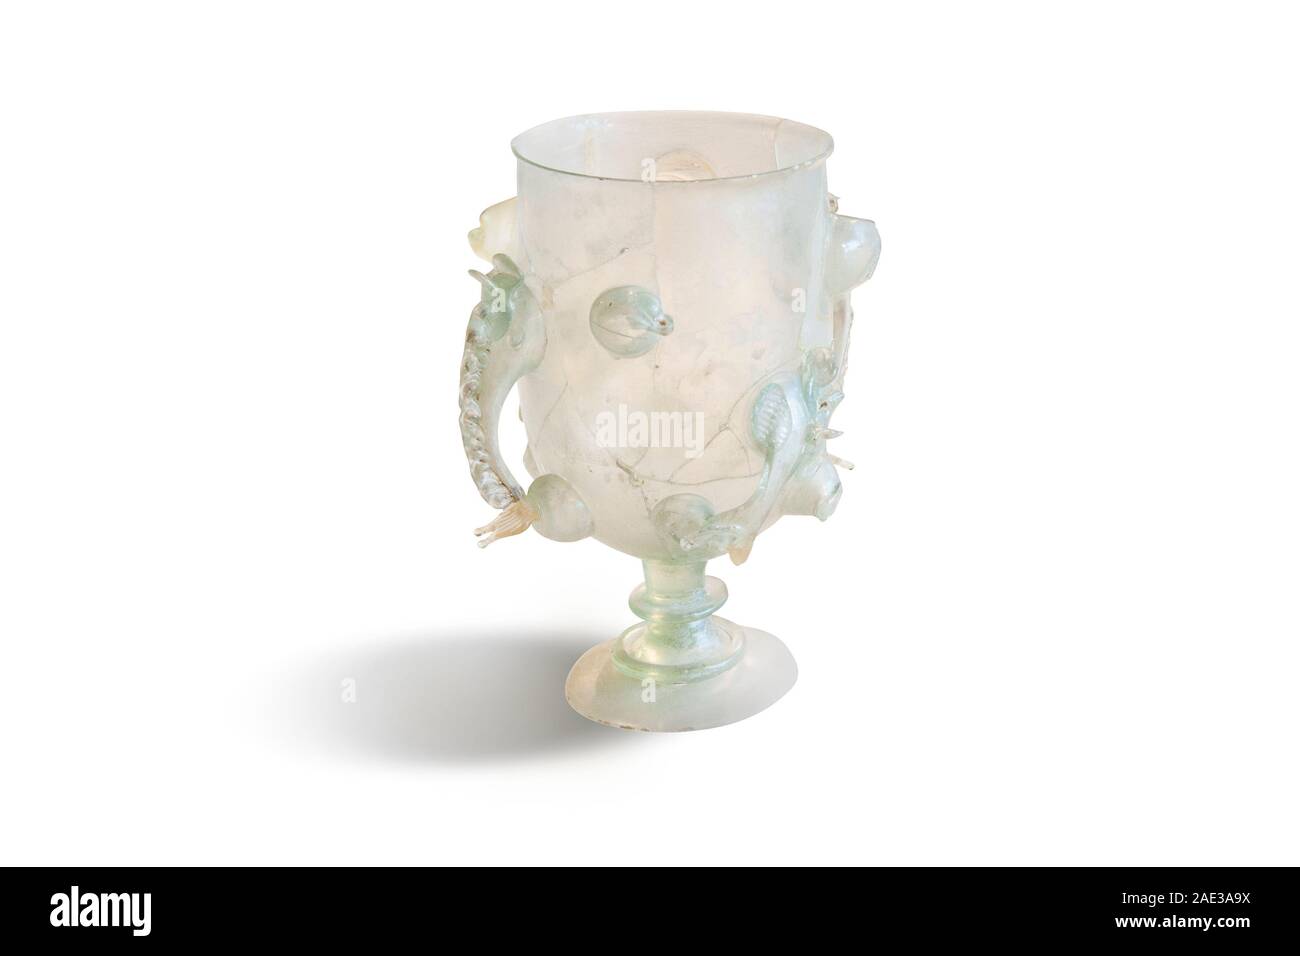 Roman goblet with  two handles from diatretglas glass. Roman Empire. The 3rd and 4th centuries AD. Clipping path for design purpopes. Stock Photo